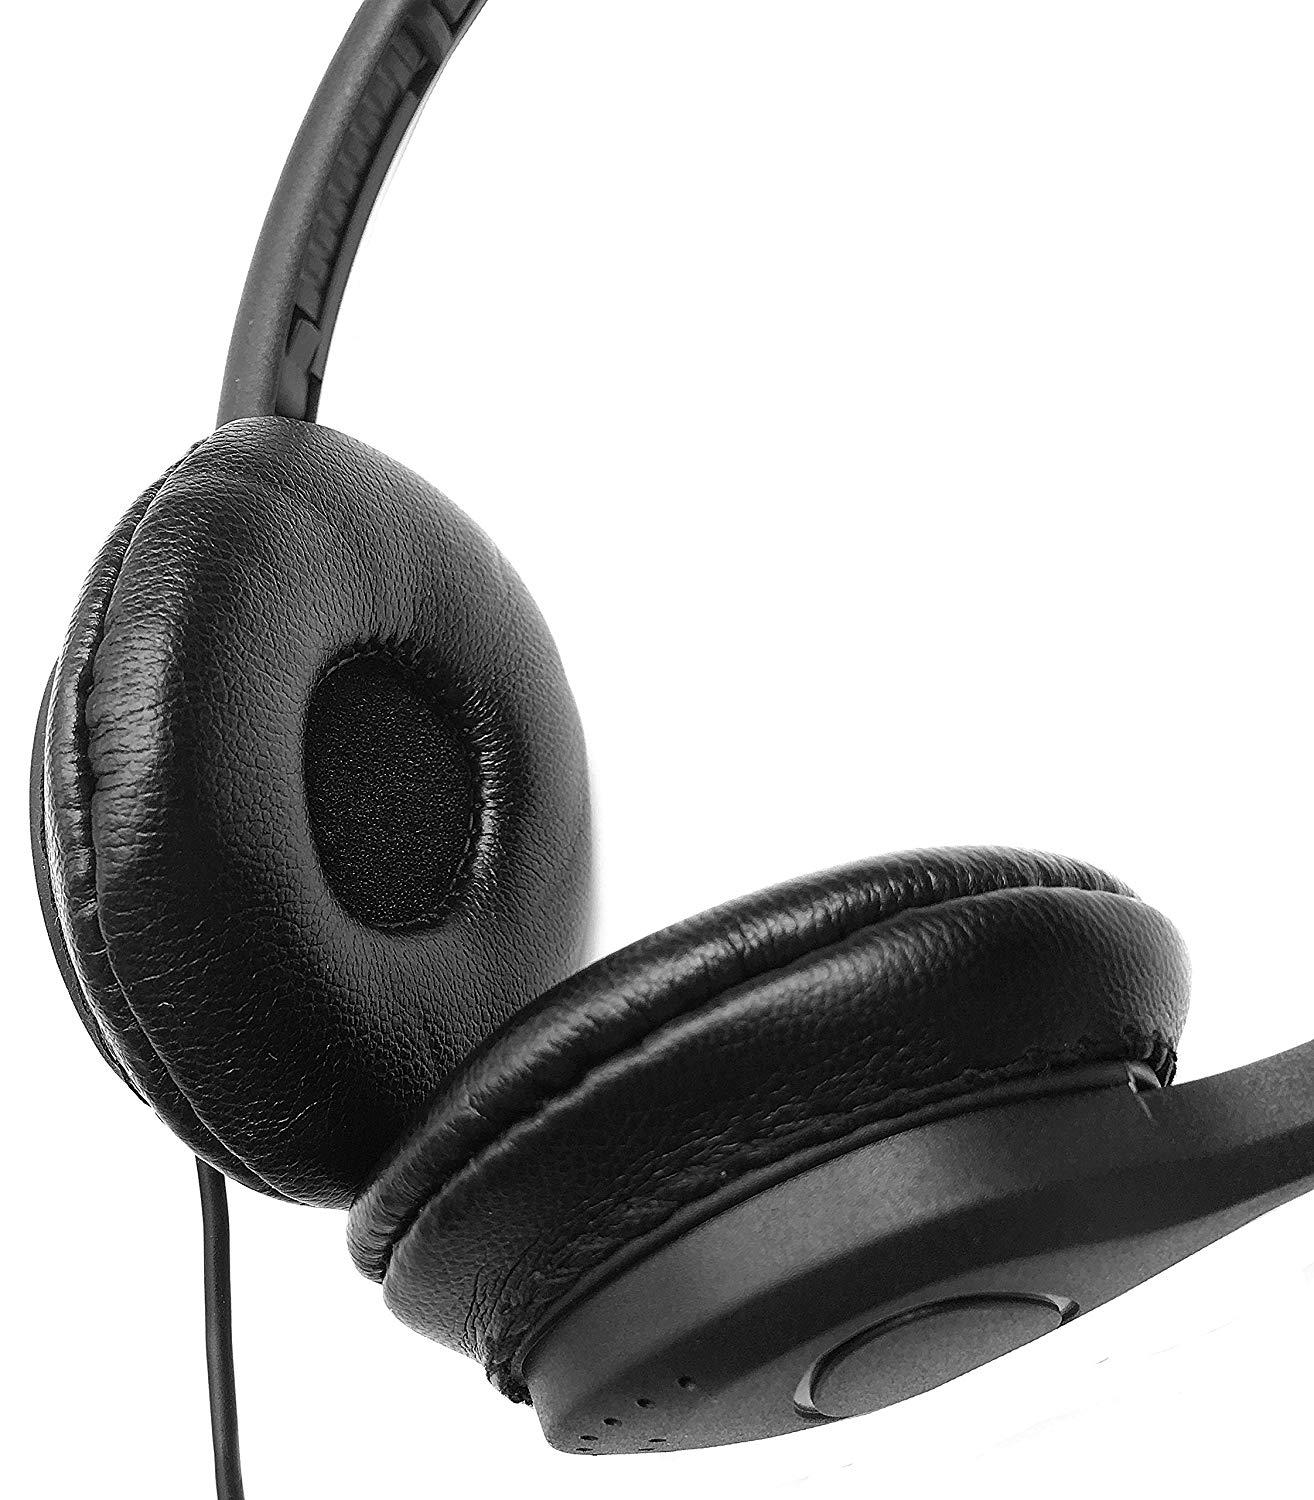 SmithOutlet Low Cost Headphone for School/Library/Classroom Part#: SG-